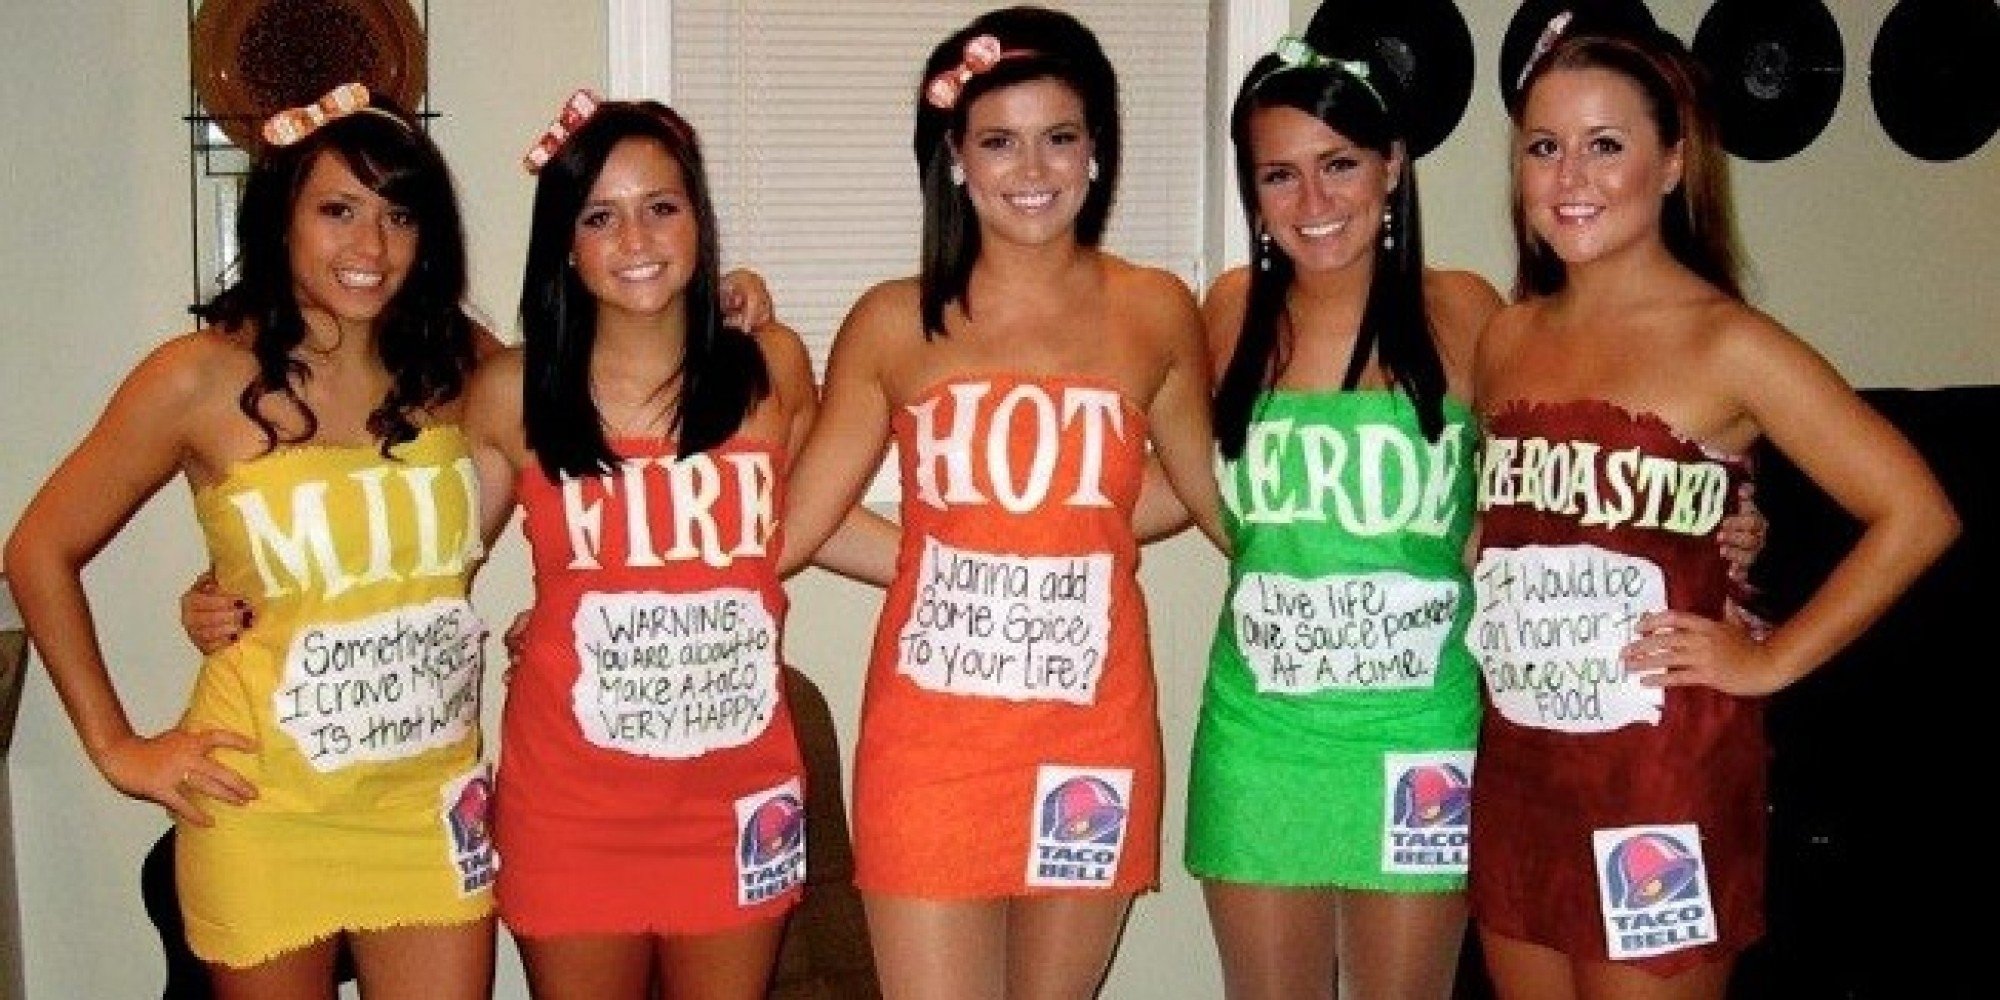 10 Unique Easy College Halloween Costume Ideas 30 cheap and easy pop culture halloween costumes huffpost 2022